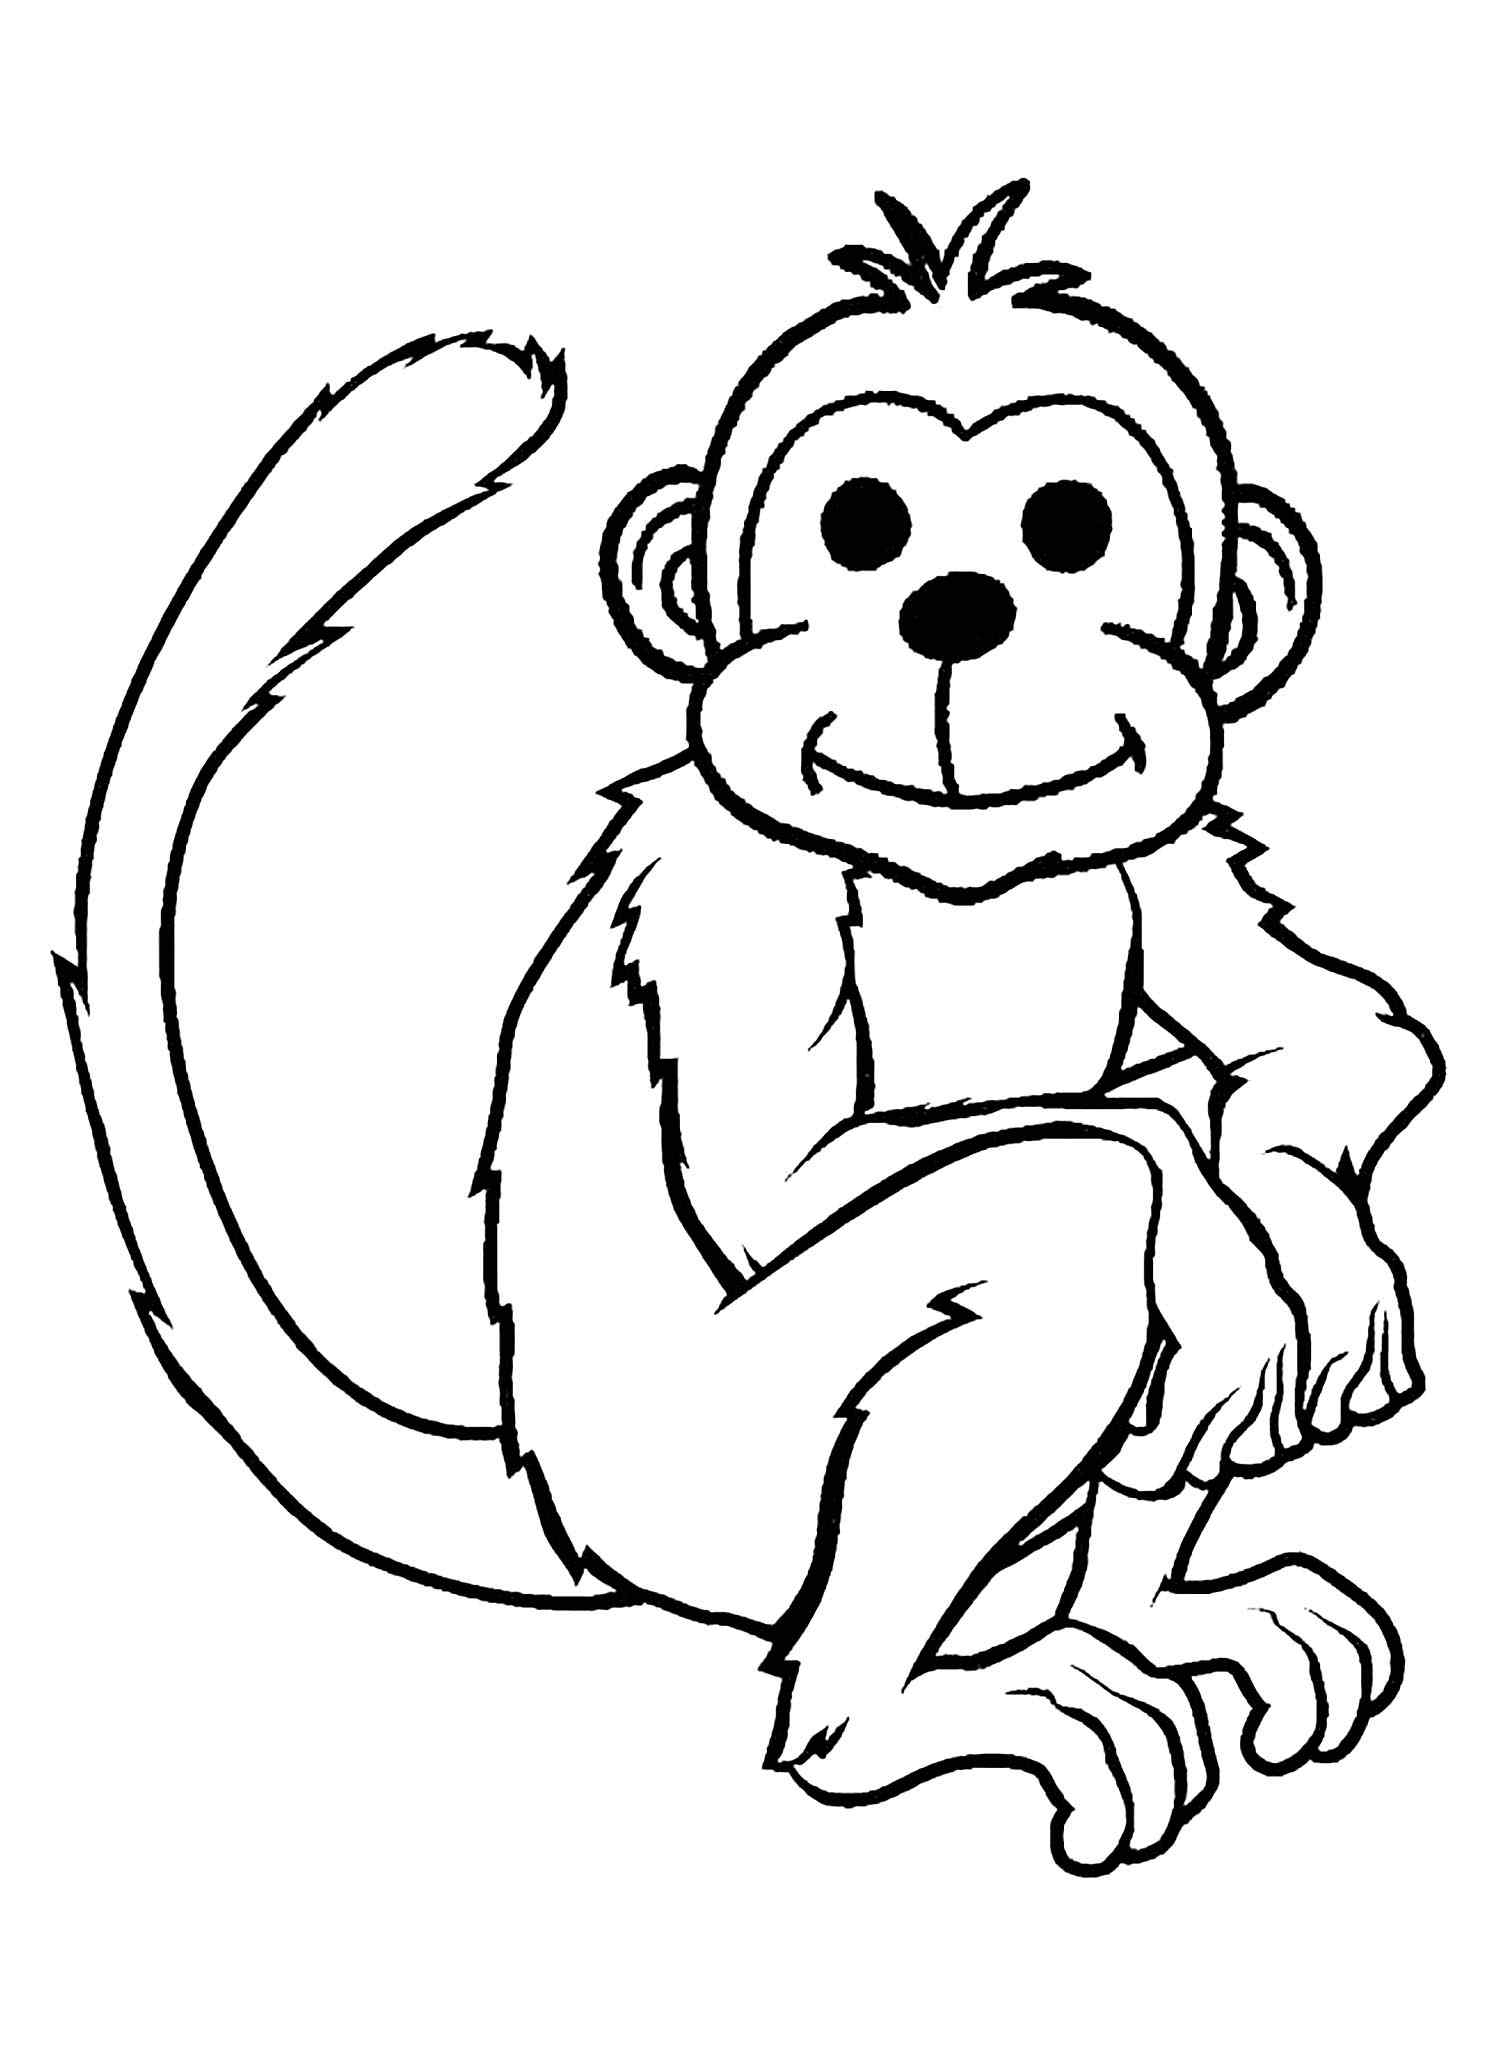 New Printable Monkeys Coloring Page